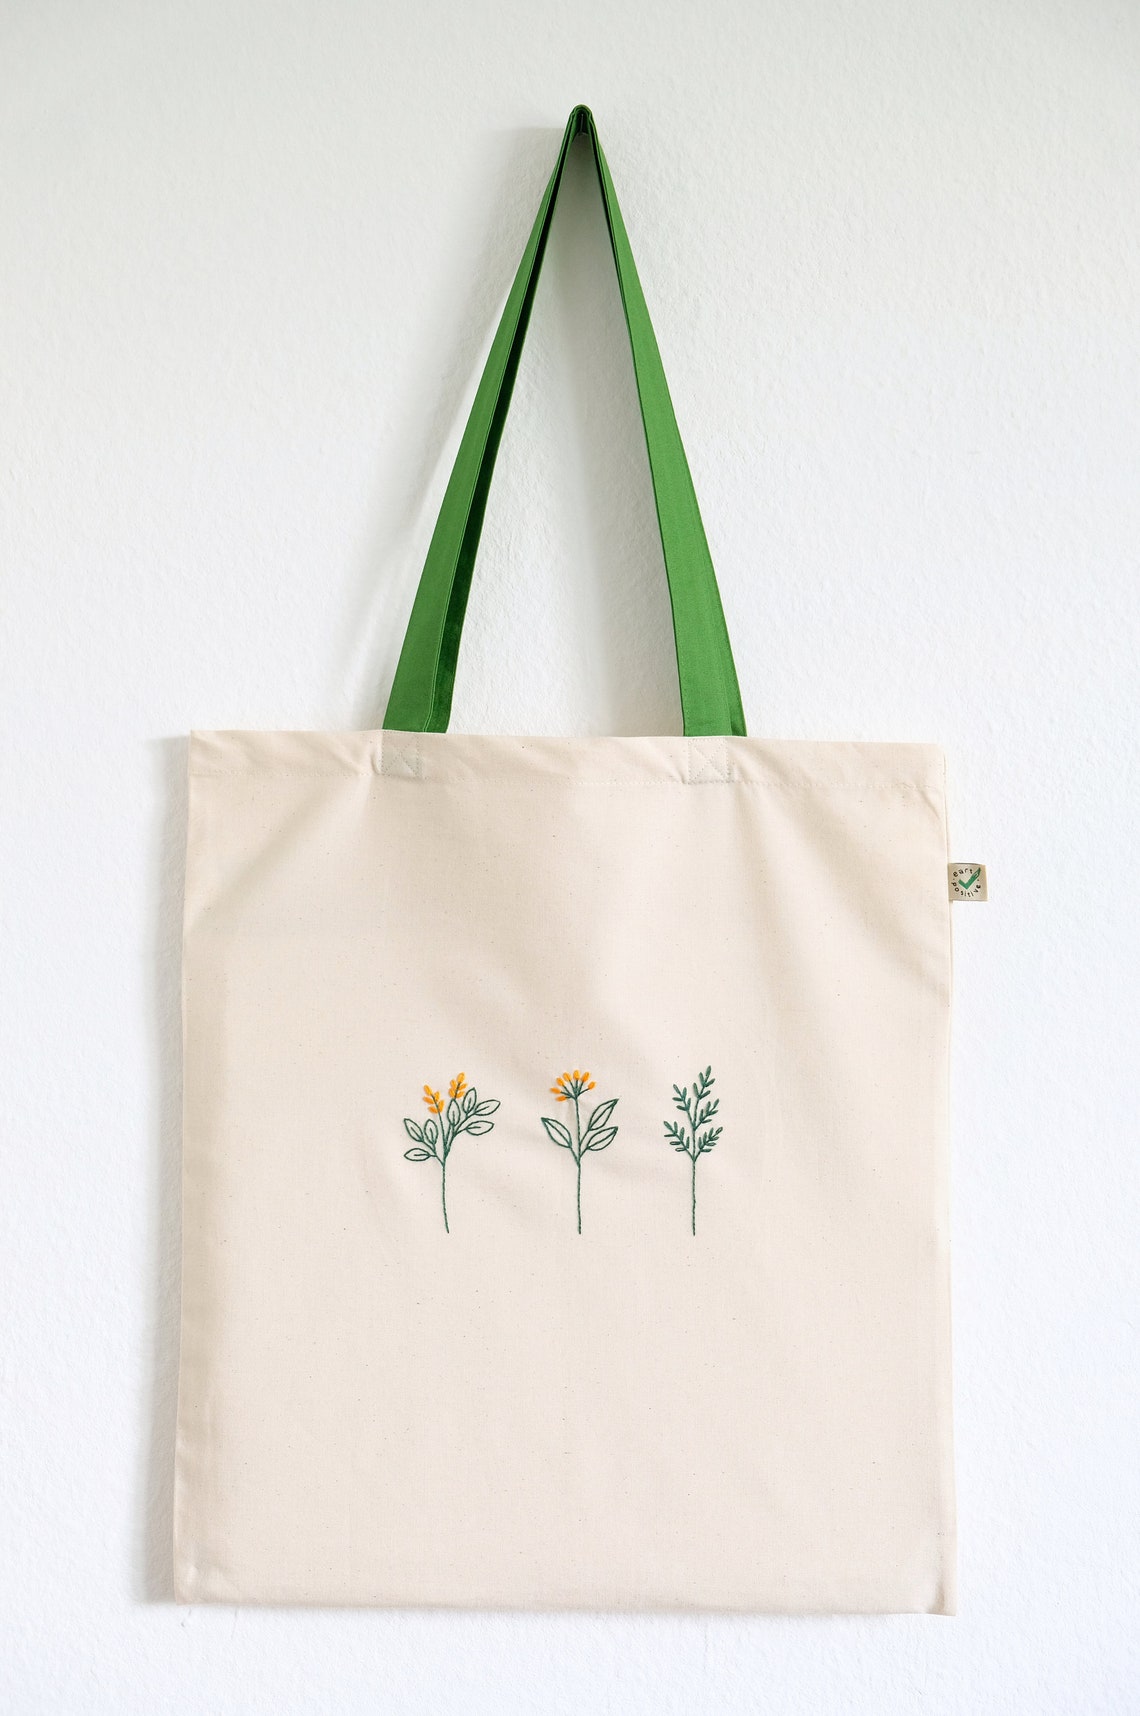 Embroidered Tote Bag Wild Flowers Botanical Organic Cotton - Etsy